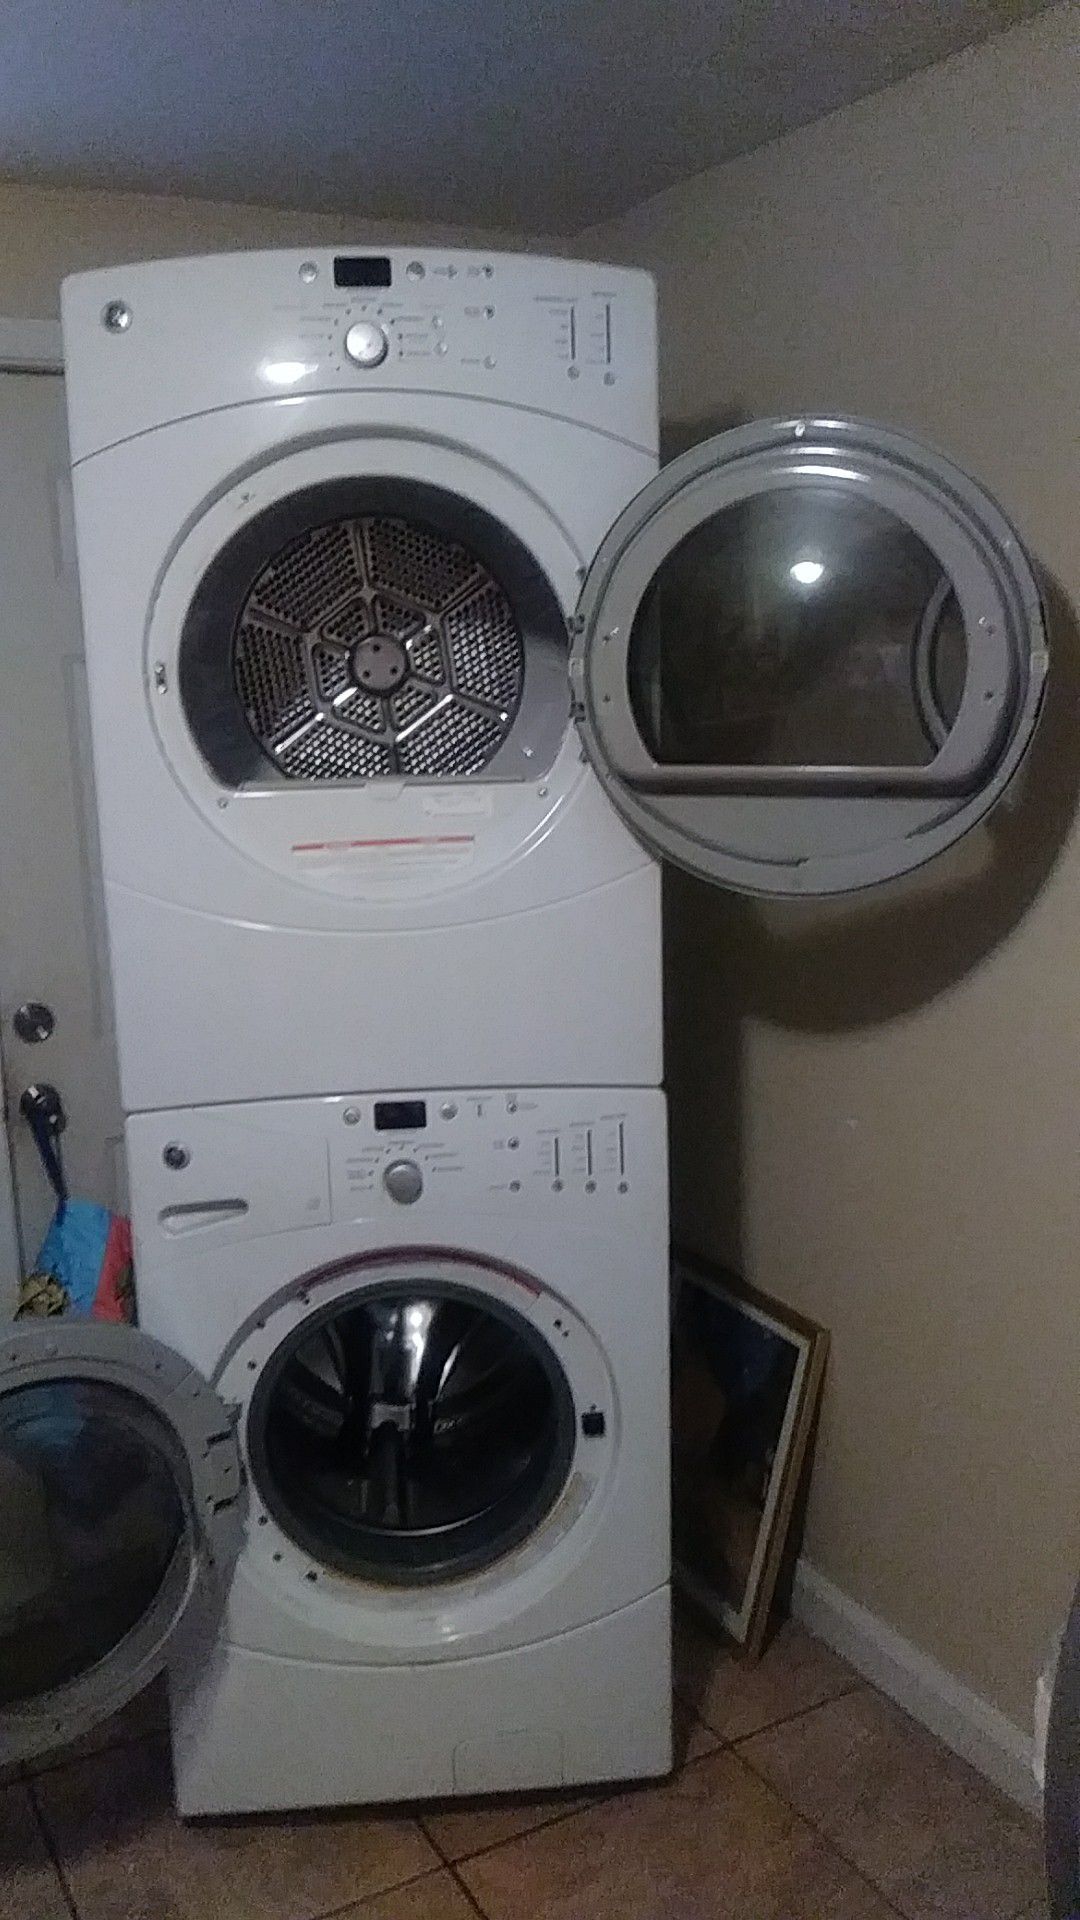 price-reduced-general-electric-washer-dryer-for-sale-in-wilmington